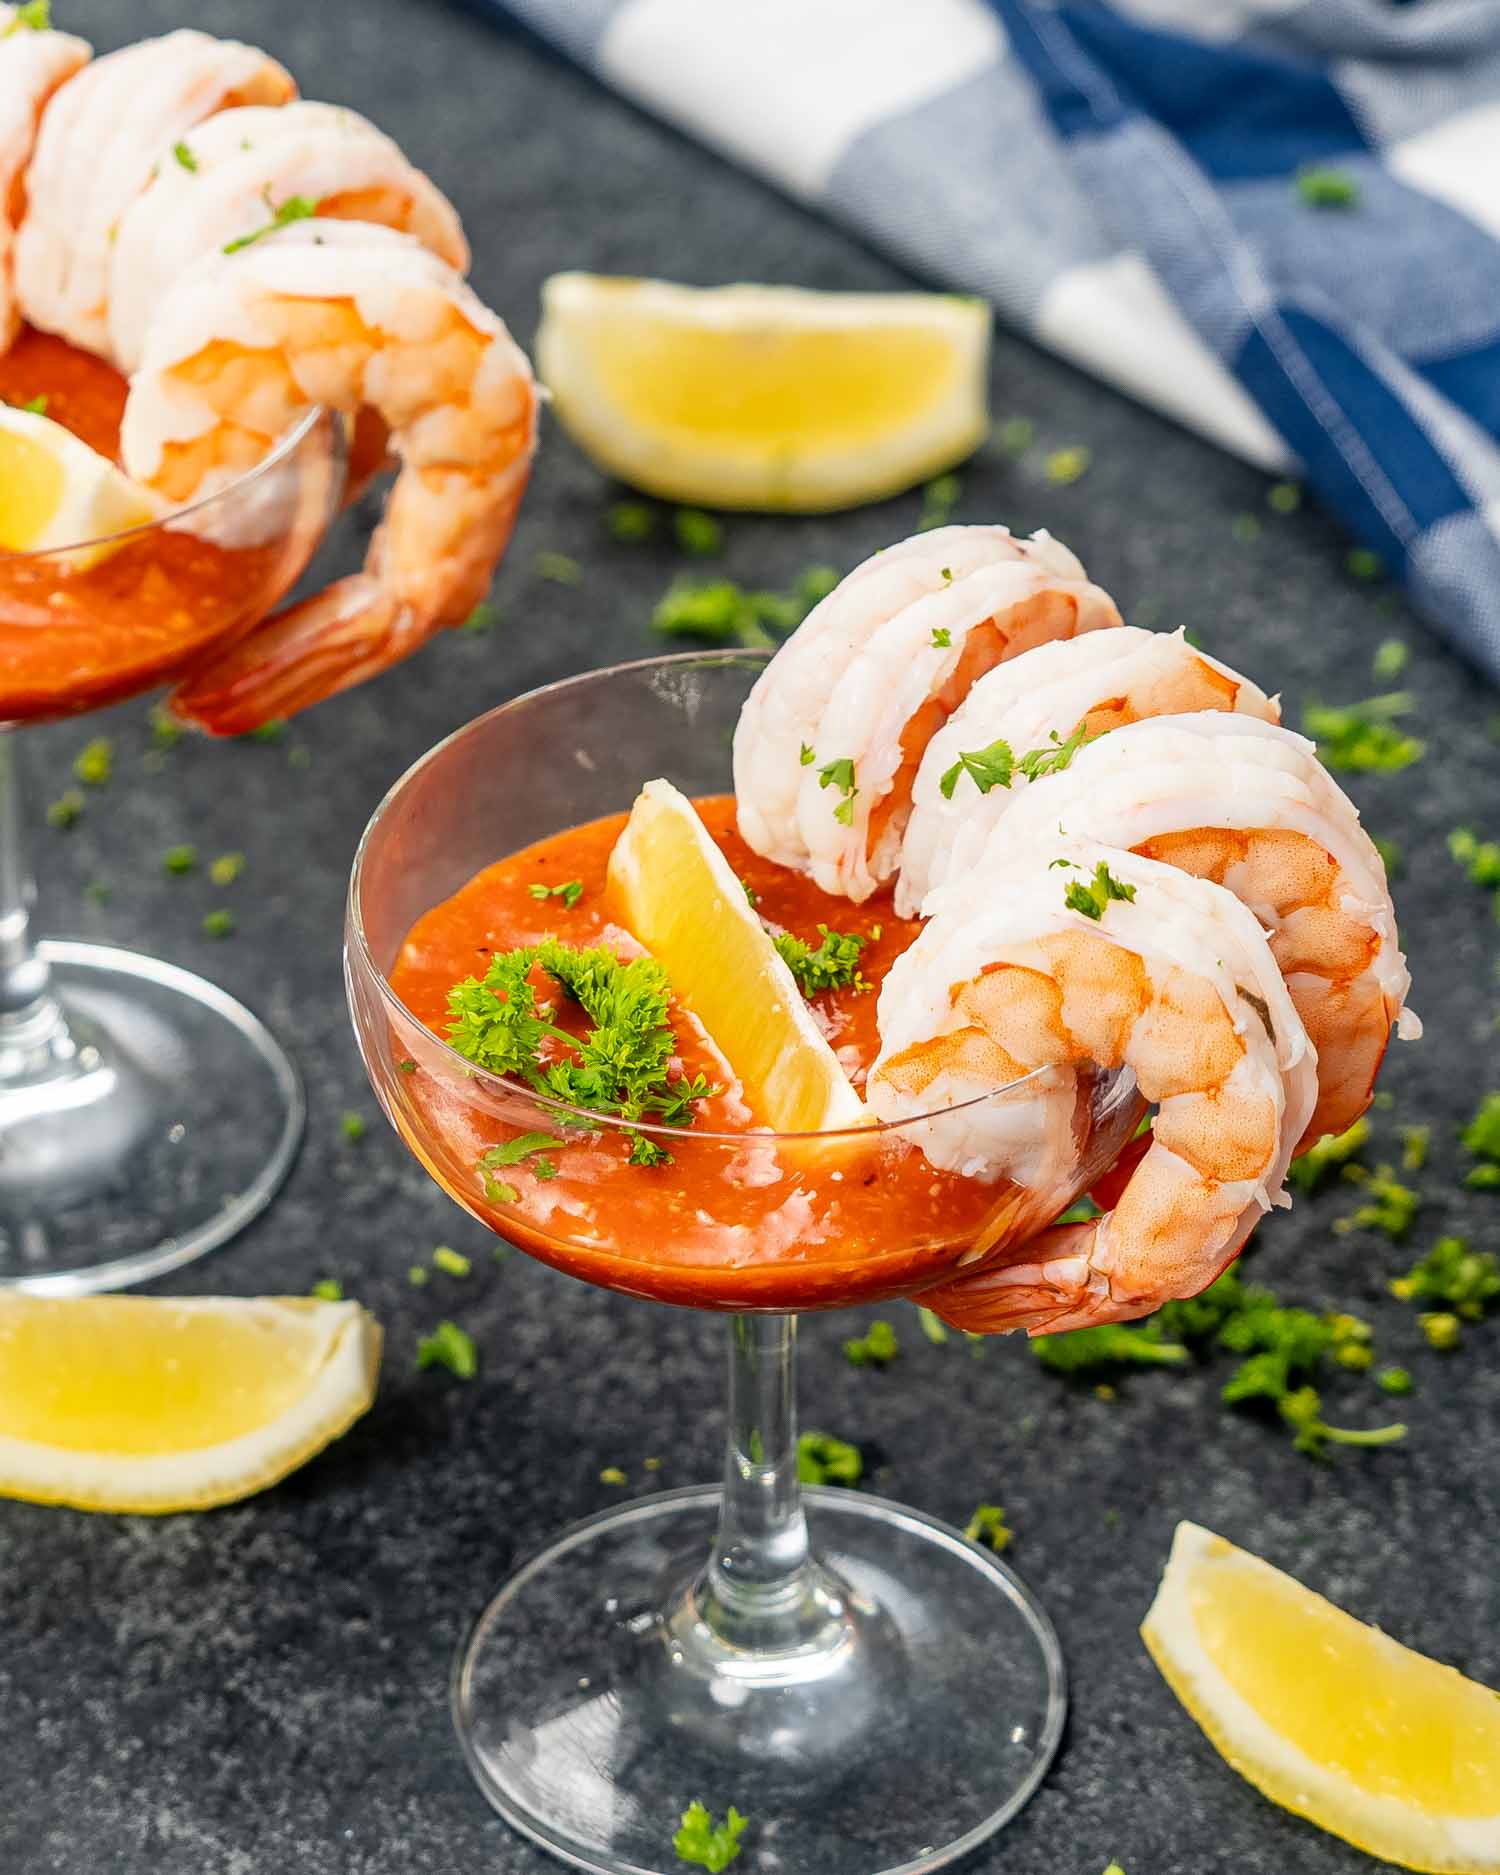 Cocktail glasses filled with shrimp cocktail, beautifully garnished with fresh lemon wedges and parsley on a table.